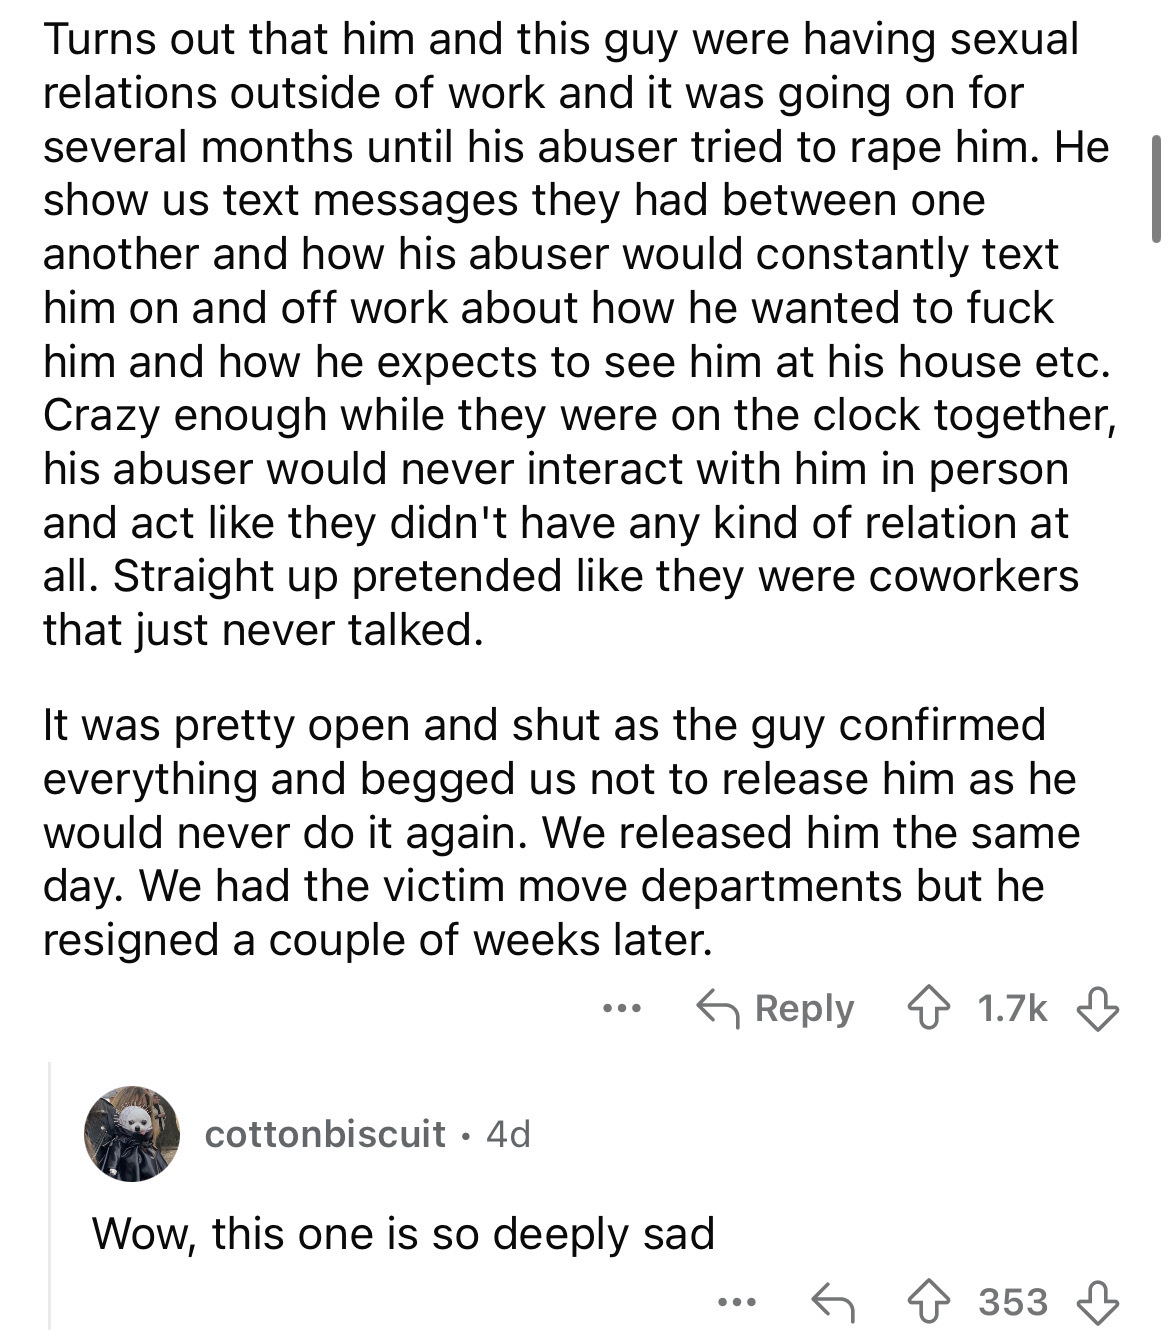 document - Turns out that him and this guy were having sexual relations outside of work and it was going on for several months until his abuser tried to rape him. He show us text messages they had between one another and how his abuser would constantly te